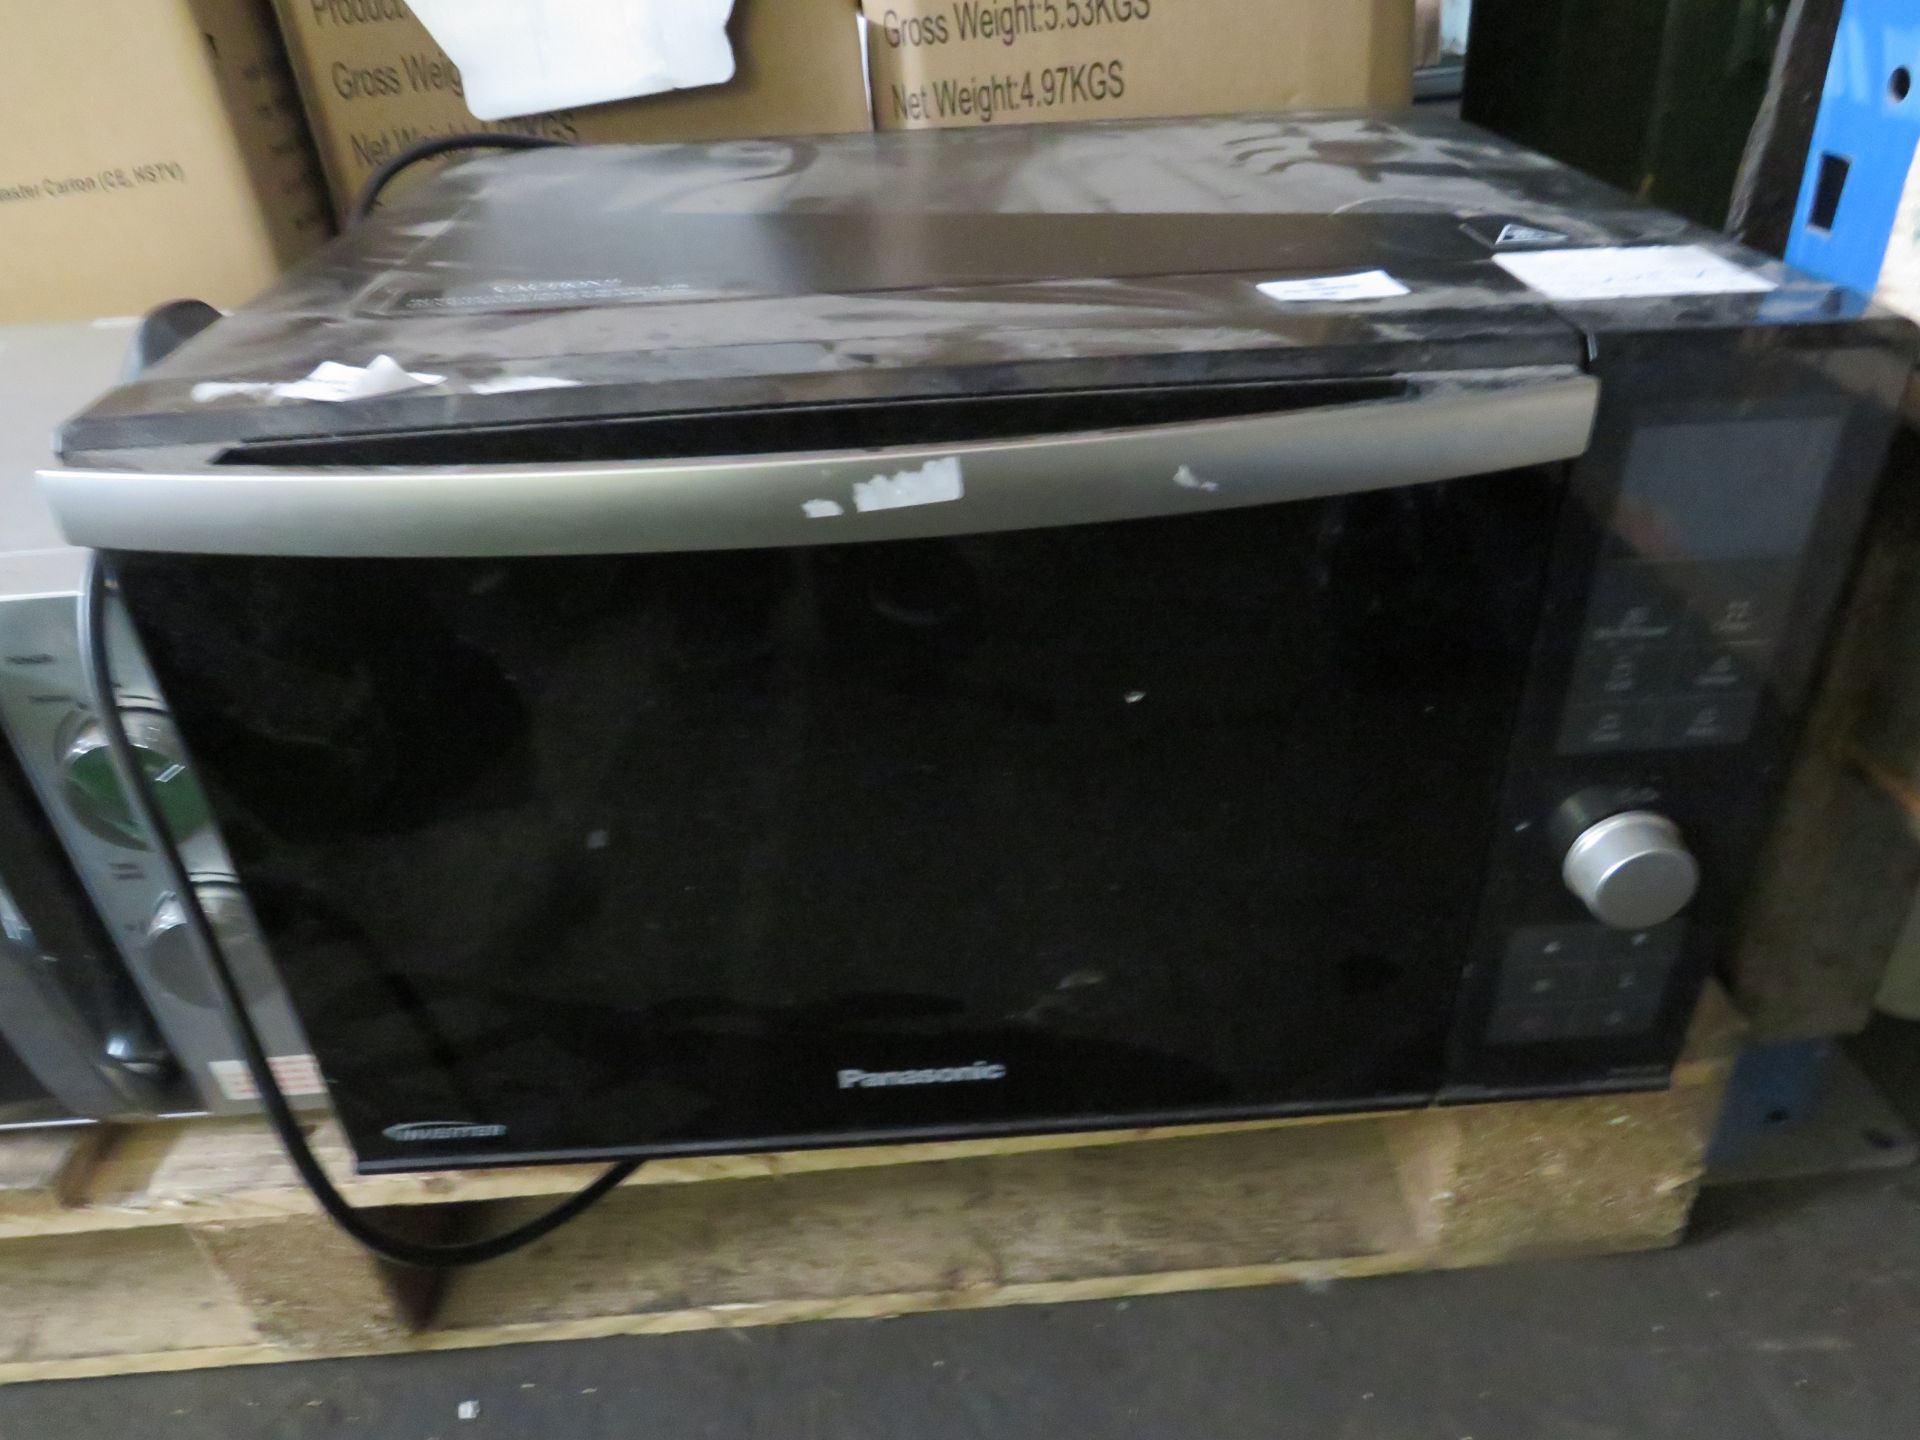 Panasoninc Inverter Microwave oven, tested working on microwave function, we have checked any